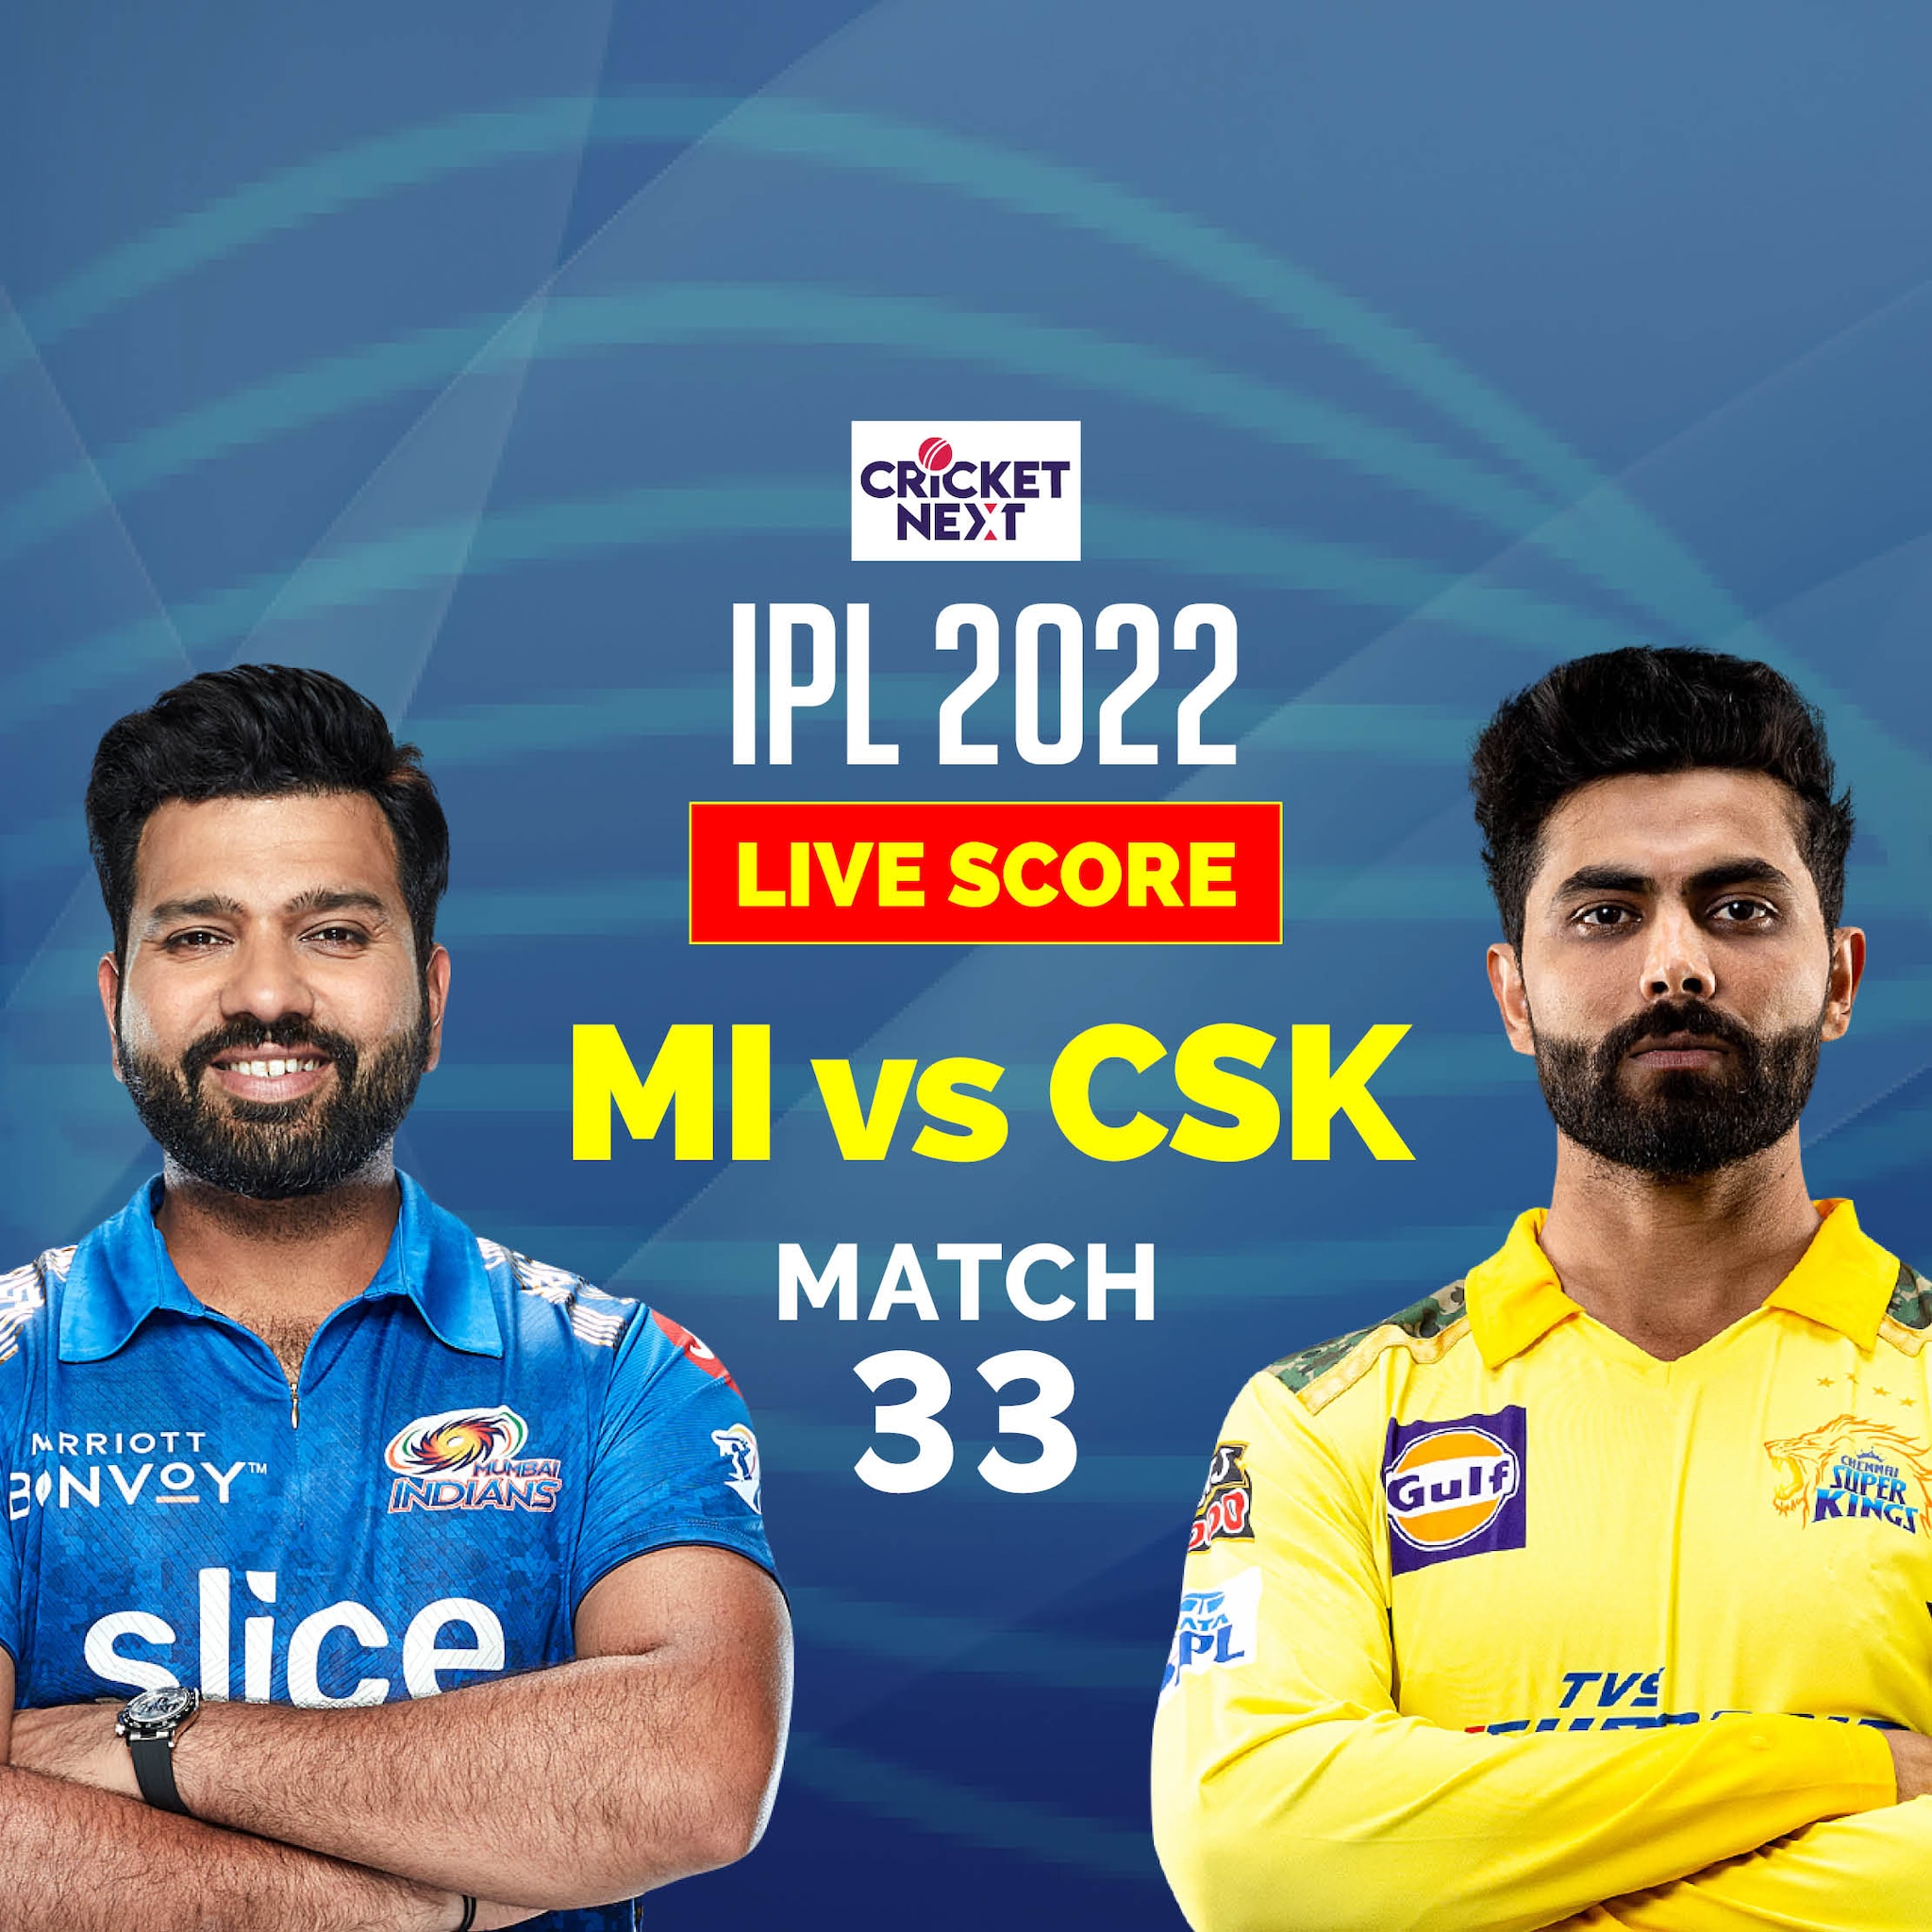 ipl live score today 2022 today match